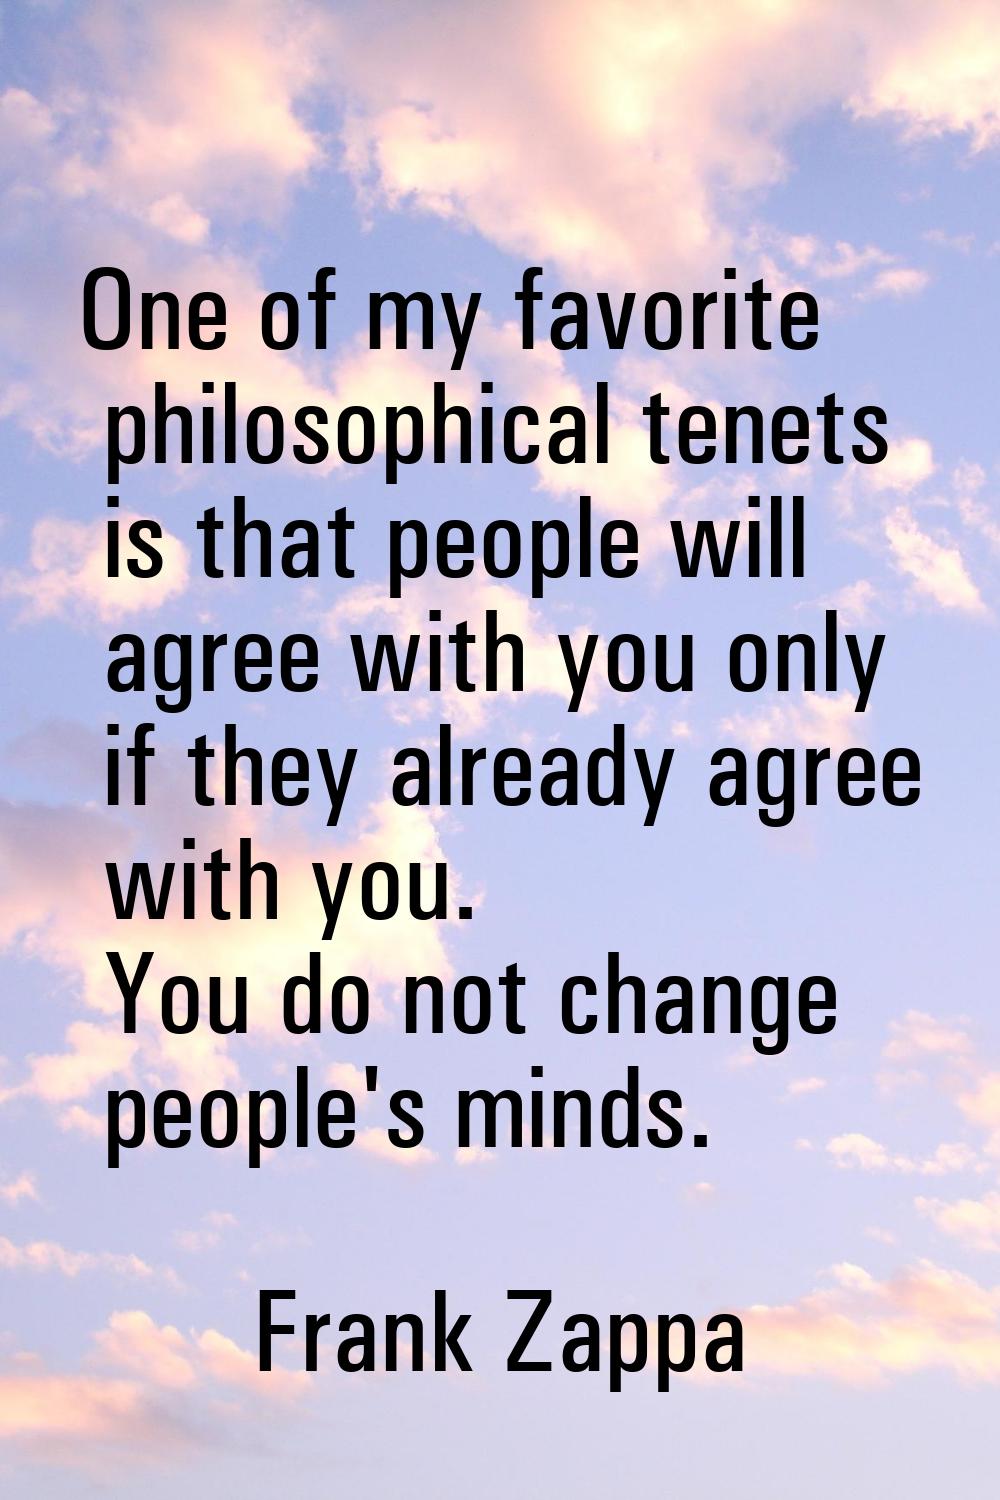 One of my favorite philosophical tenets is that people will agree with you only if they already agr